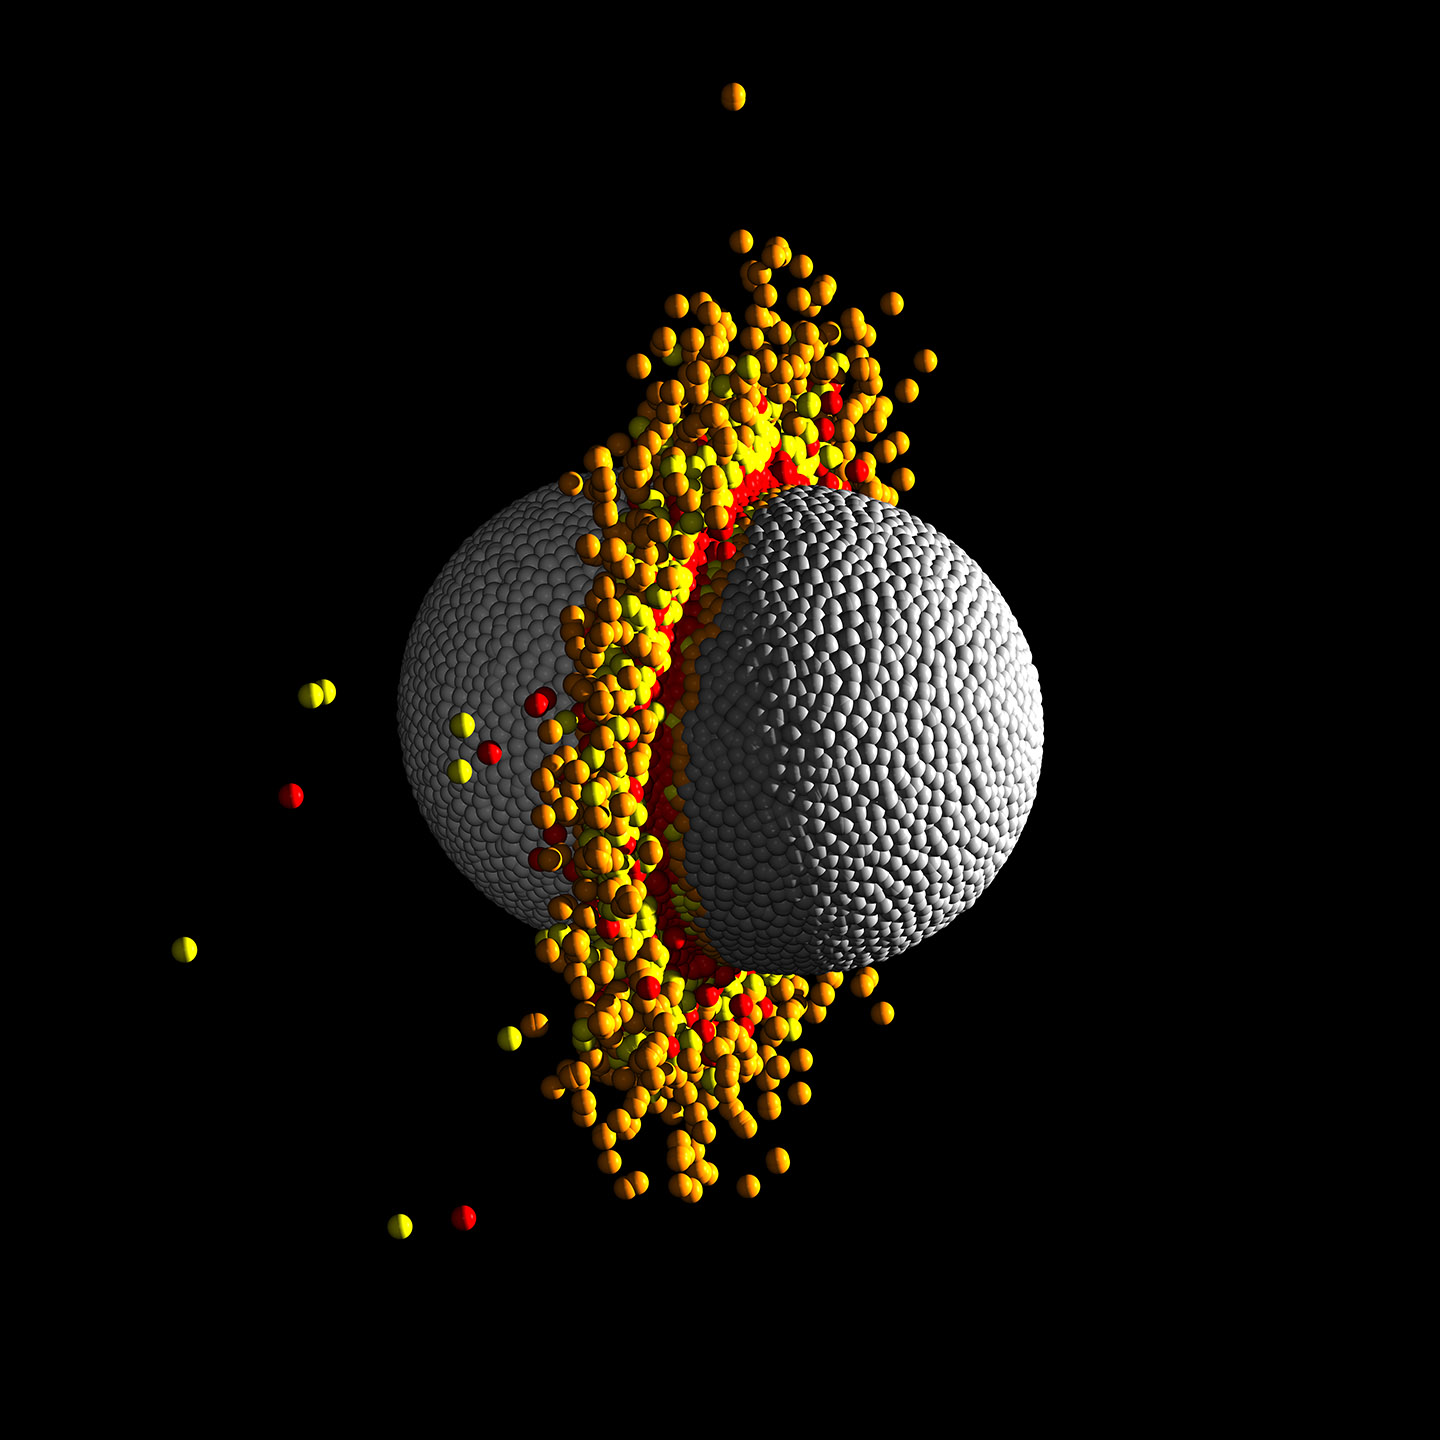 The figure shows one frame from the middle of a hydrodynamical simulation of a high-speed head-on collision between two 10 Earth-mass planets. The temperature range of the material is represented by four colors grey, orange, yellow and red, where grey is the coolest and red is the hottest. Such collisions eject a large amount of the silicate mantle material leaving a high-iron content, high-density remnant planet similar to the observed characteristics of Kepler-107c.